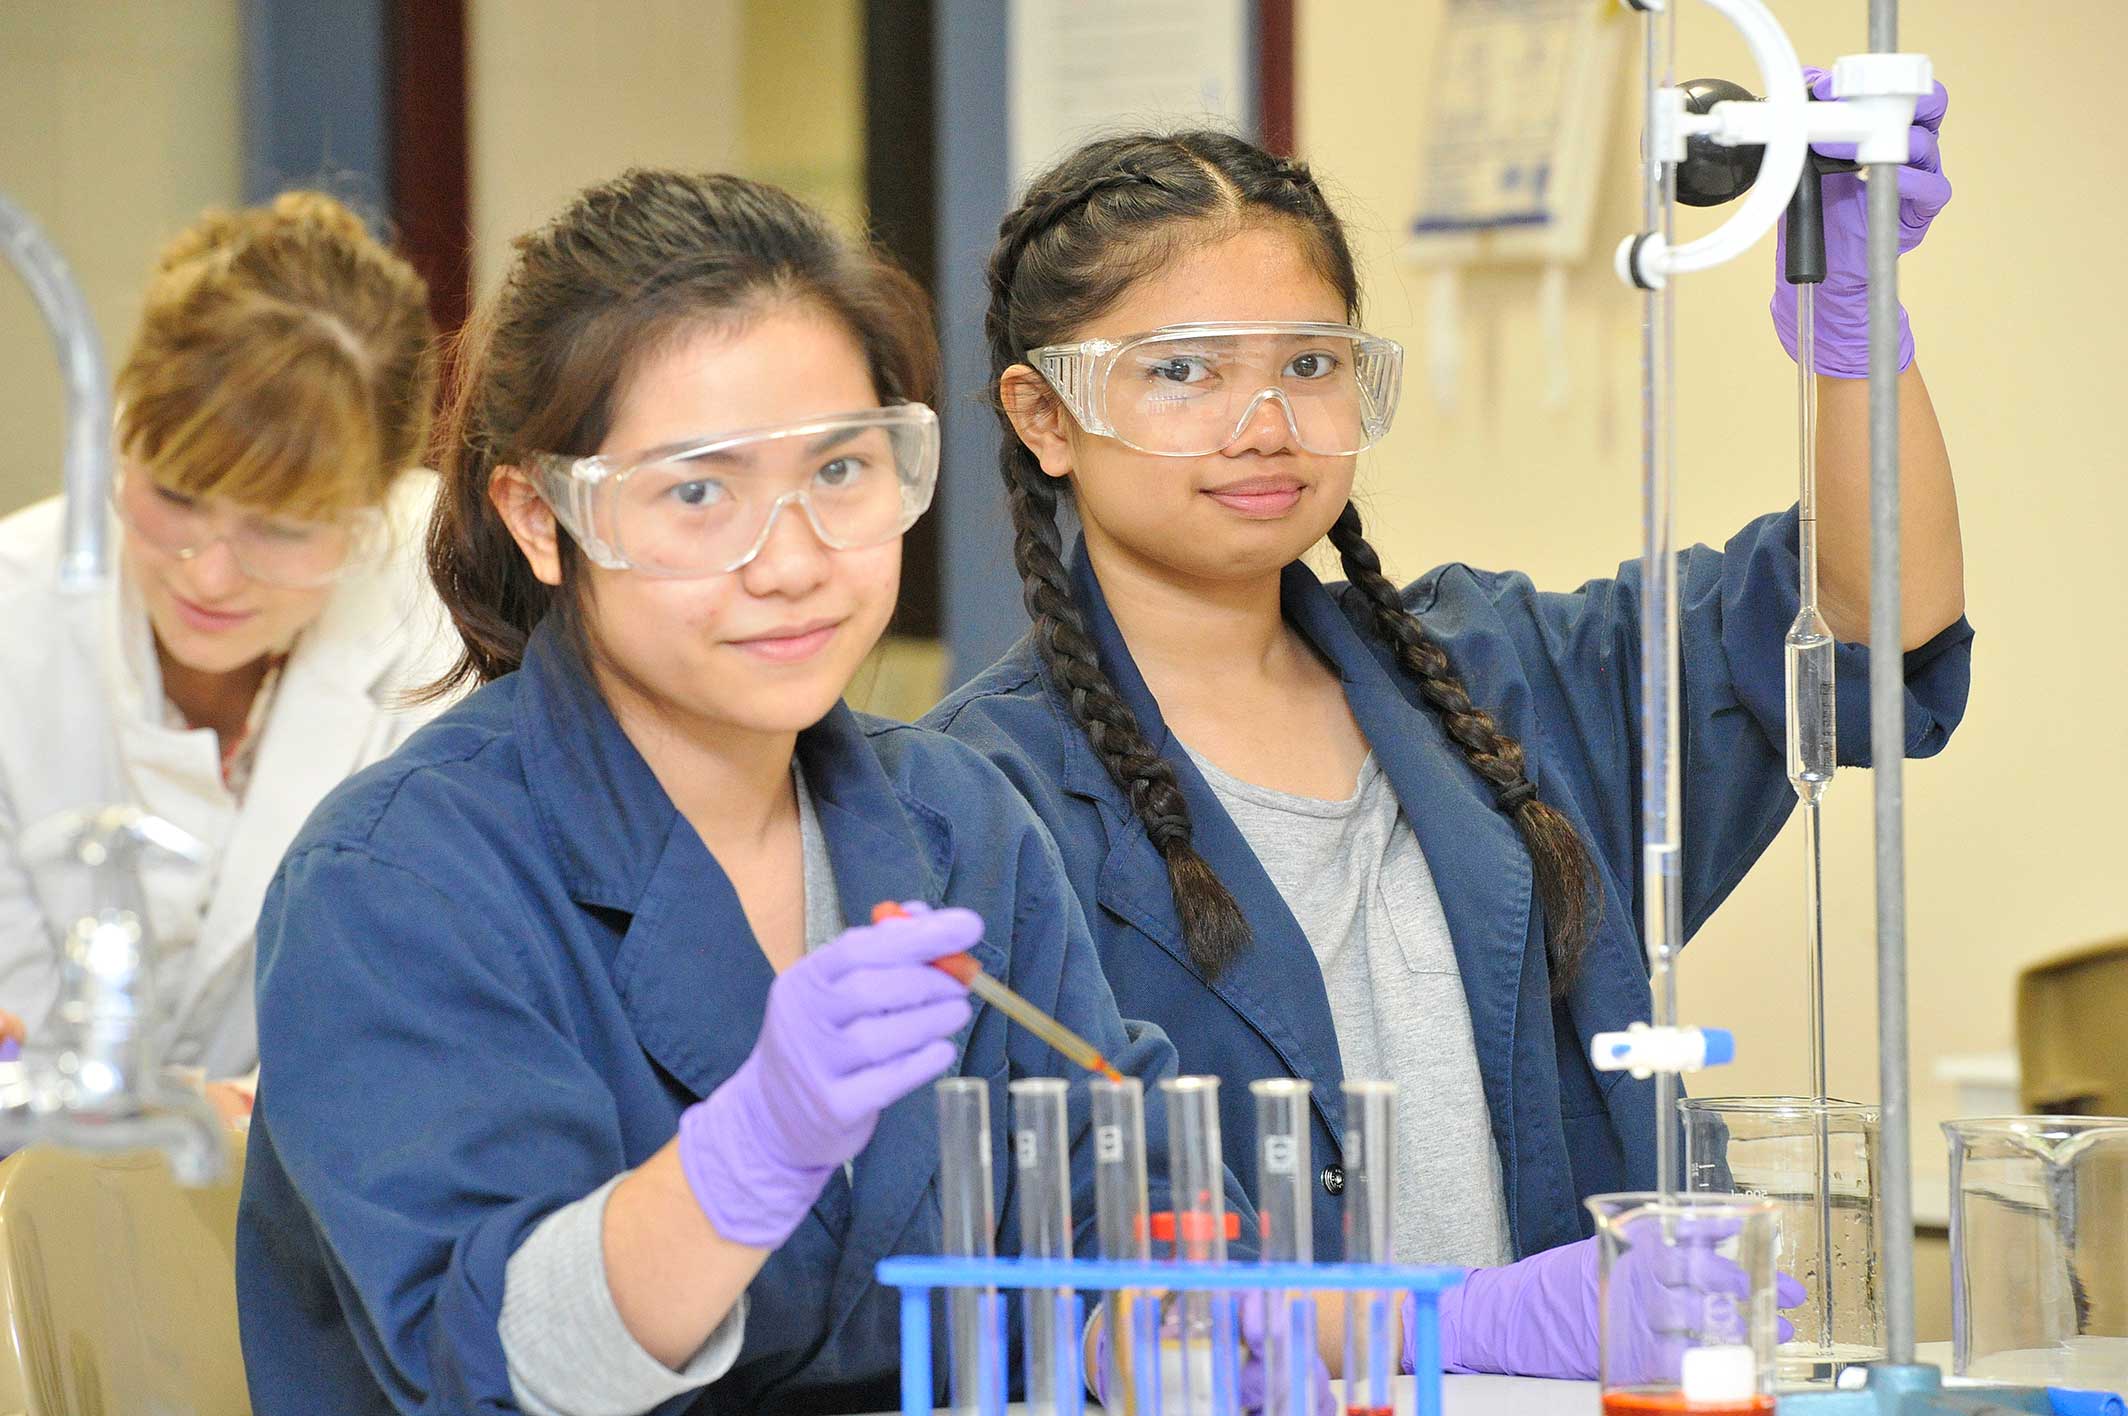 Two female students in a science lab